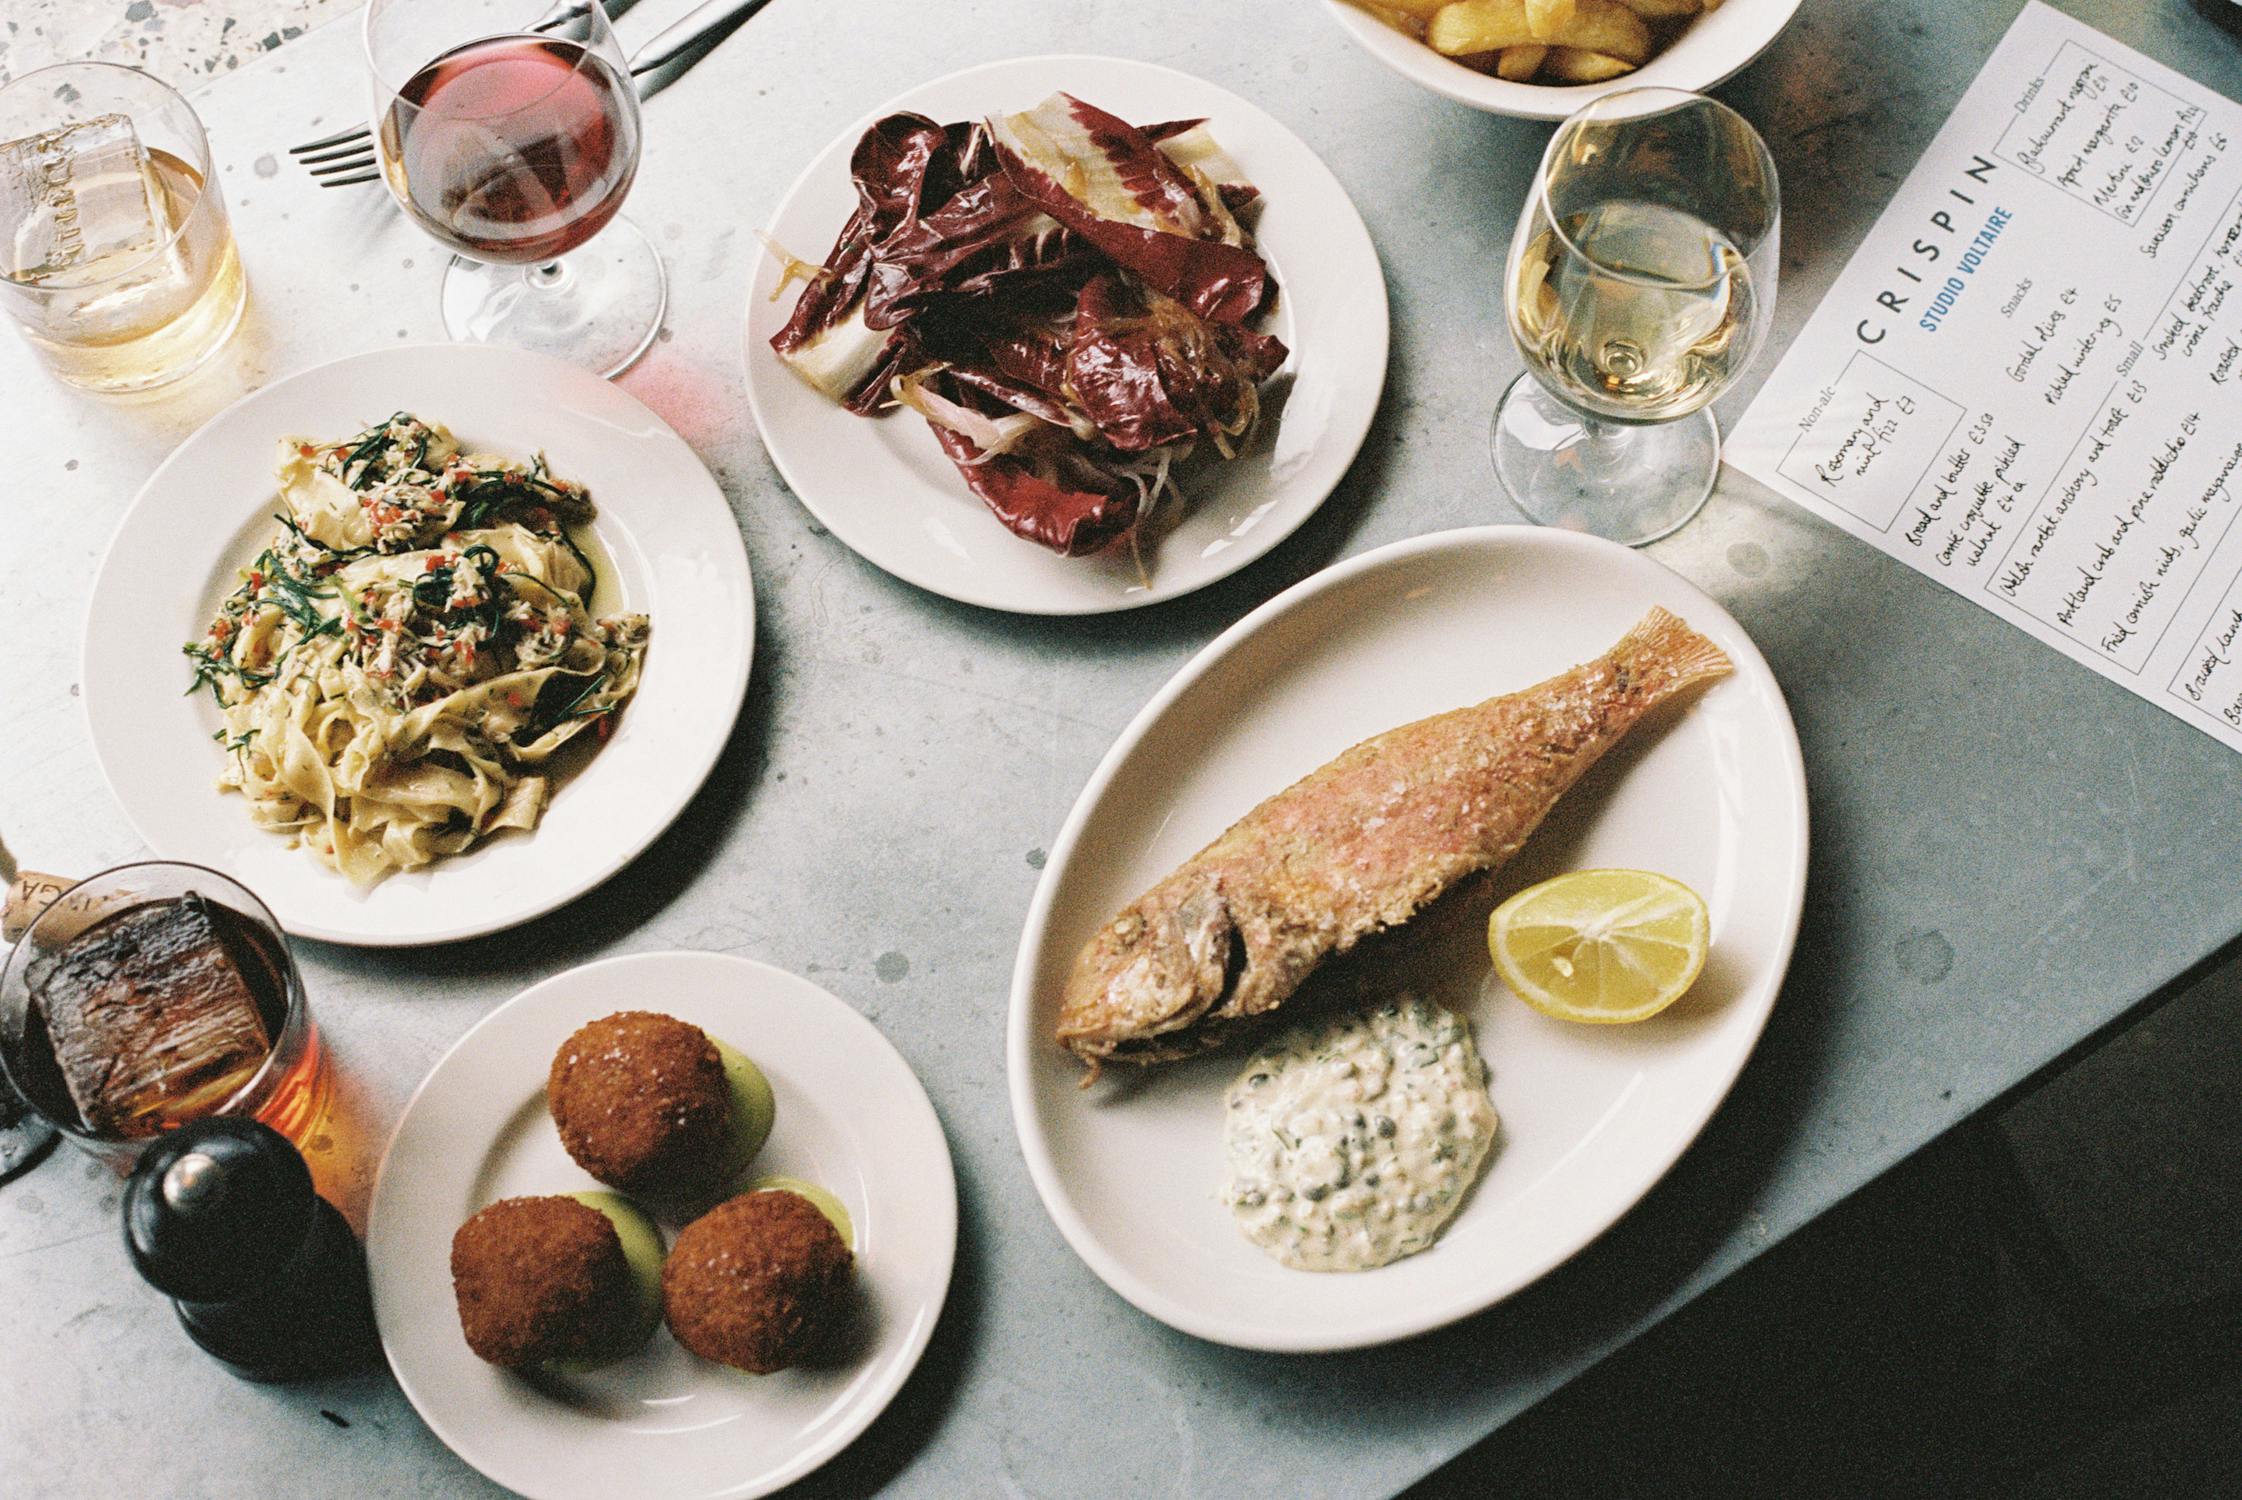 A photograph of a table with plates of food and drinks. There is a bowl of chips, a fried fish, croquettes, and different drinks that include red wine, a cocktail and a menu.